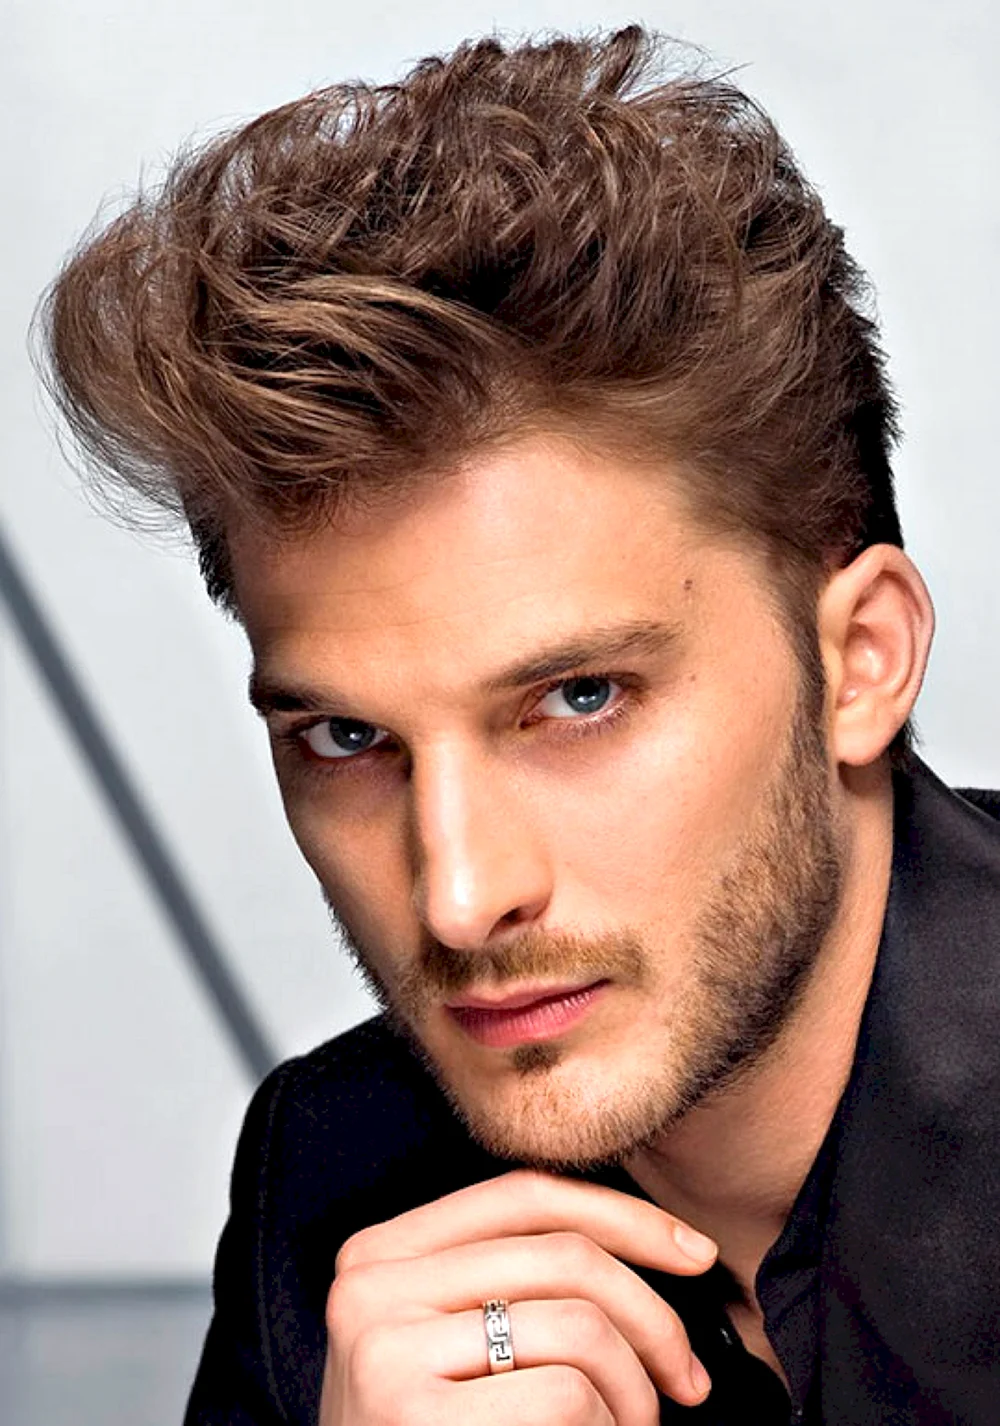 Hairstyles for men